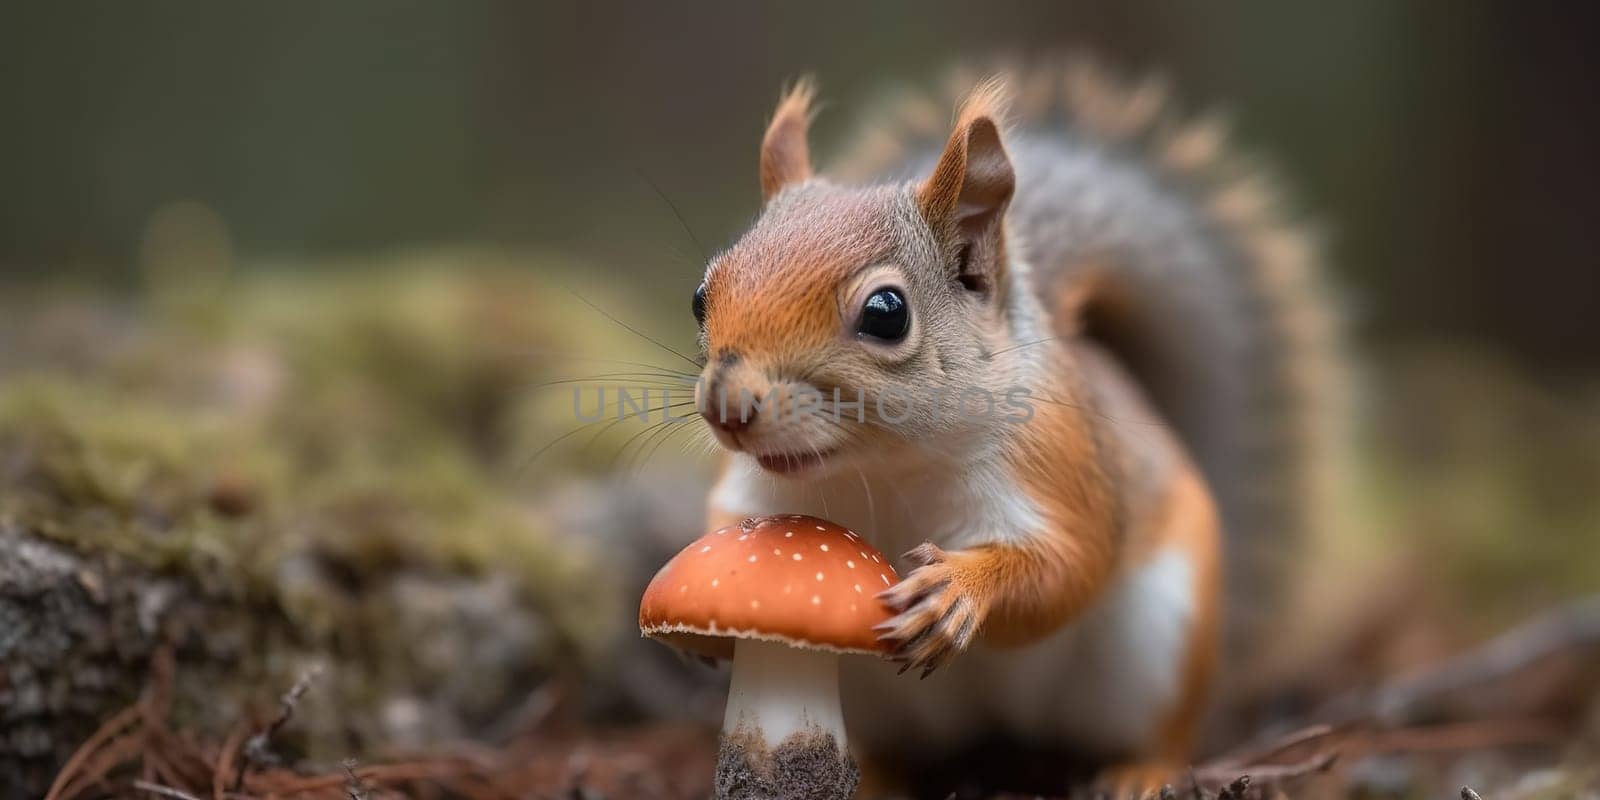 Cute Wild Squirrel With Mushroom In The Forest, Animal In Natural Habitat